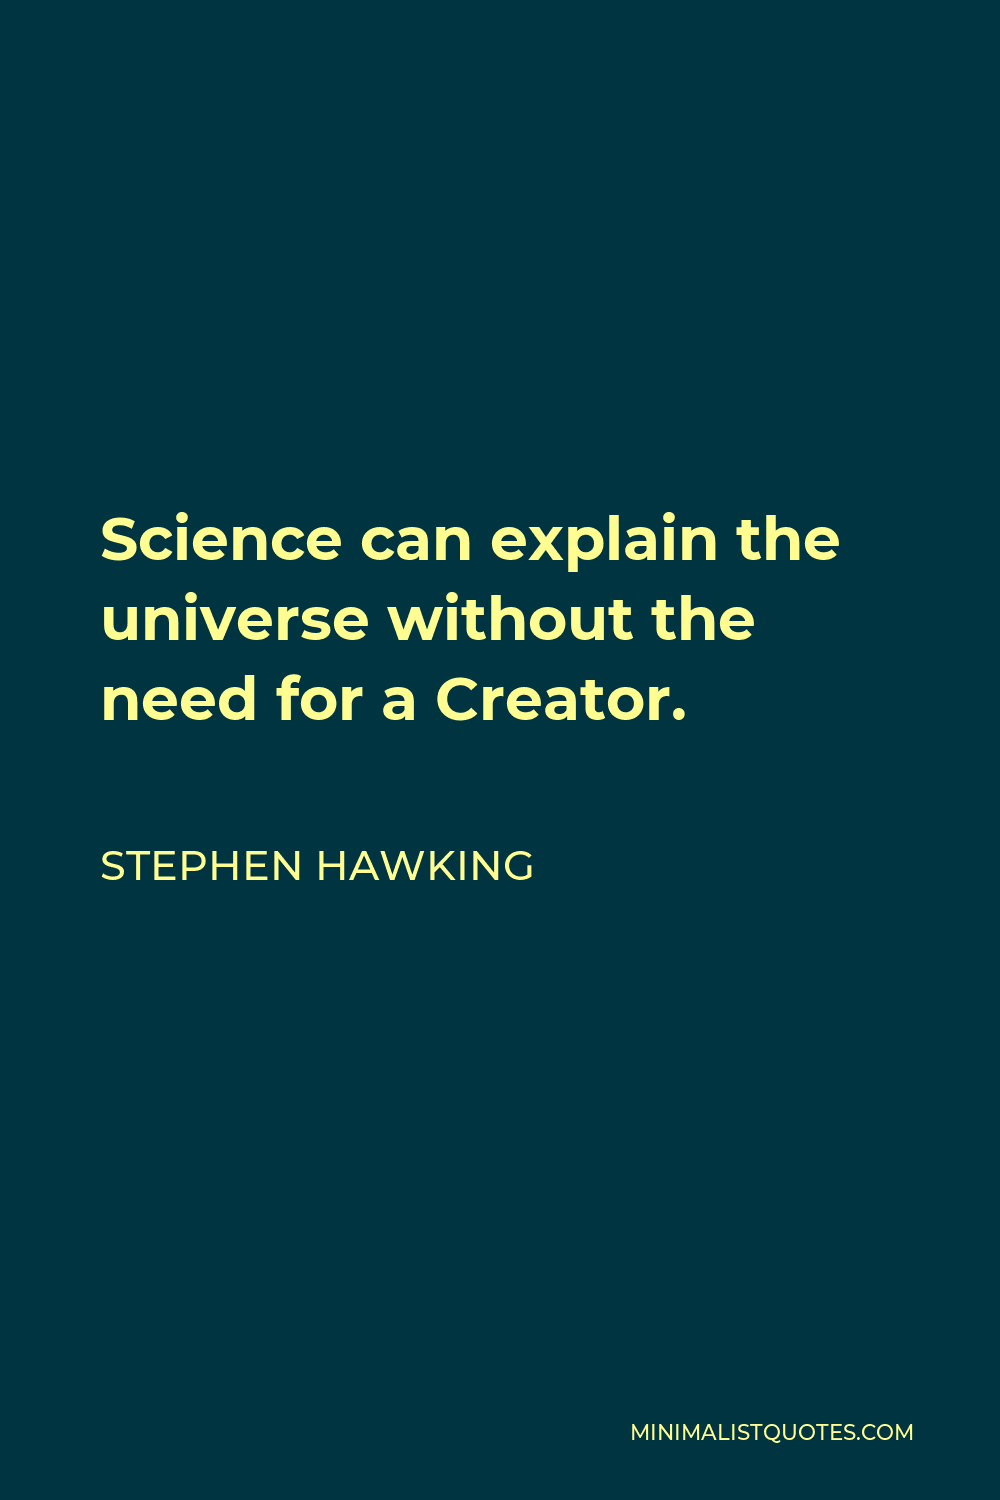 Stephen Hawking Quote - Science can explain the universe without the need for a Creator.